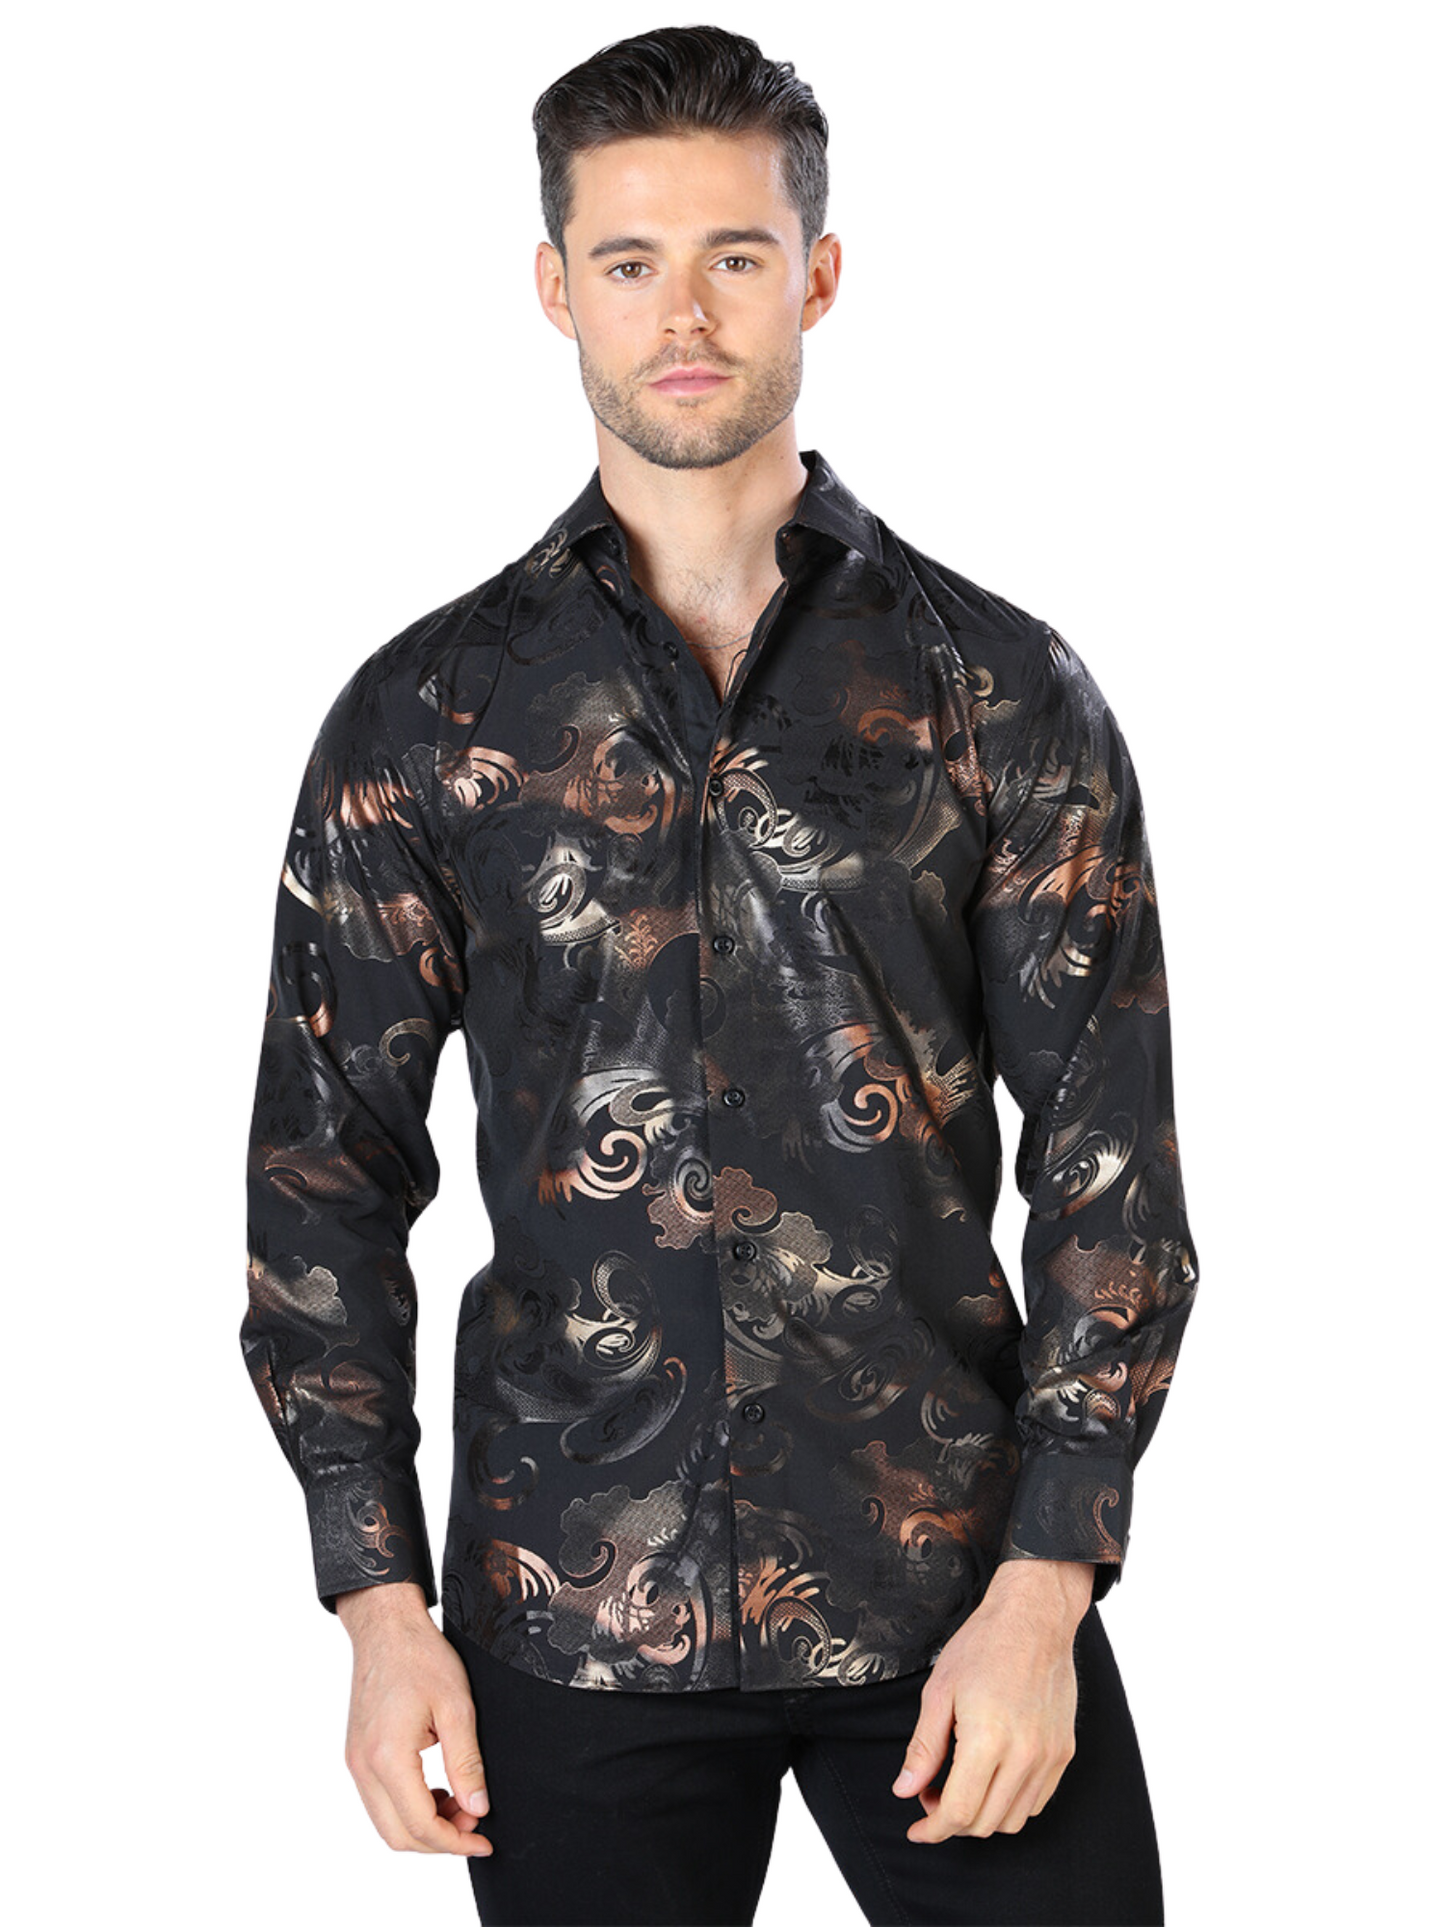 Casual Long Sleeve Printed Black/Gold Shirt for Men 'The Lord of the Skies' - ID: 44035 Casual Shirt The Lord of the Skies Black/Gold